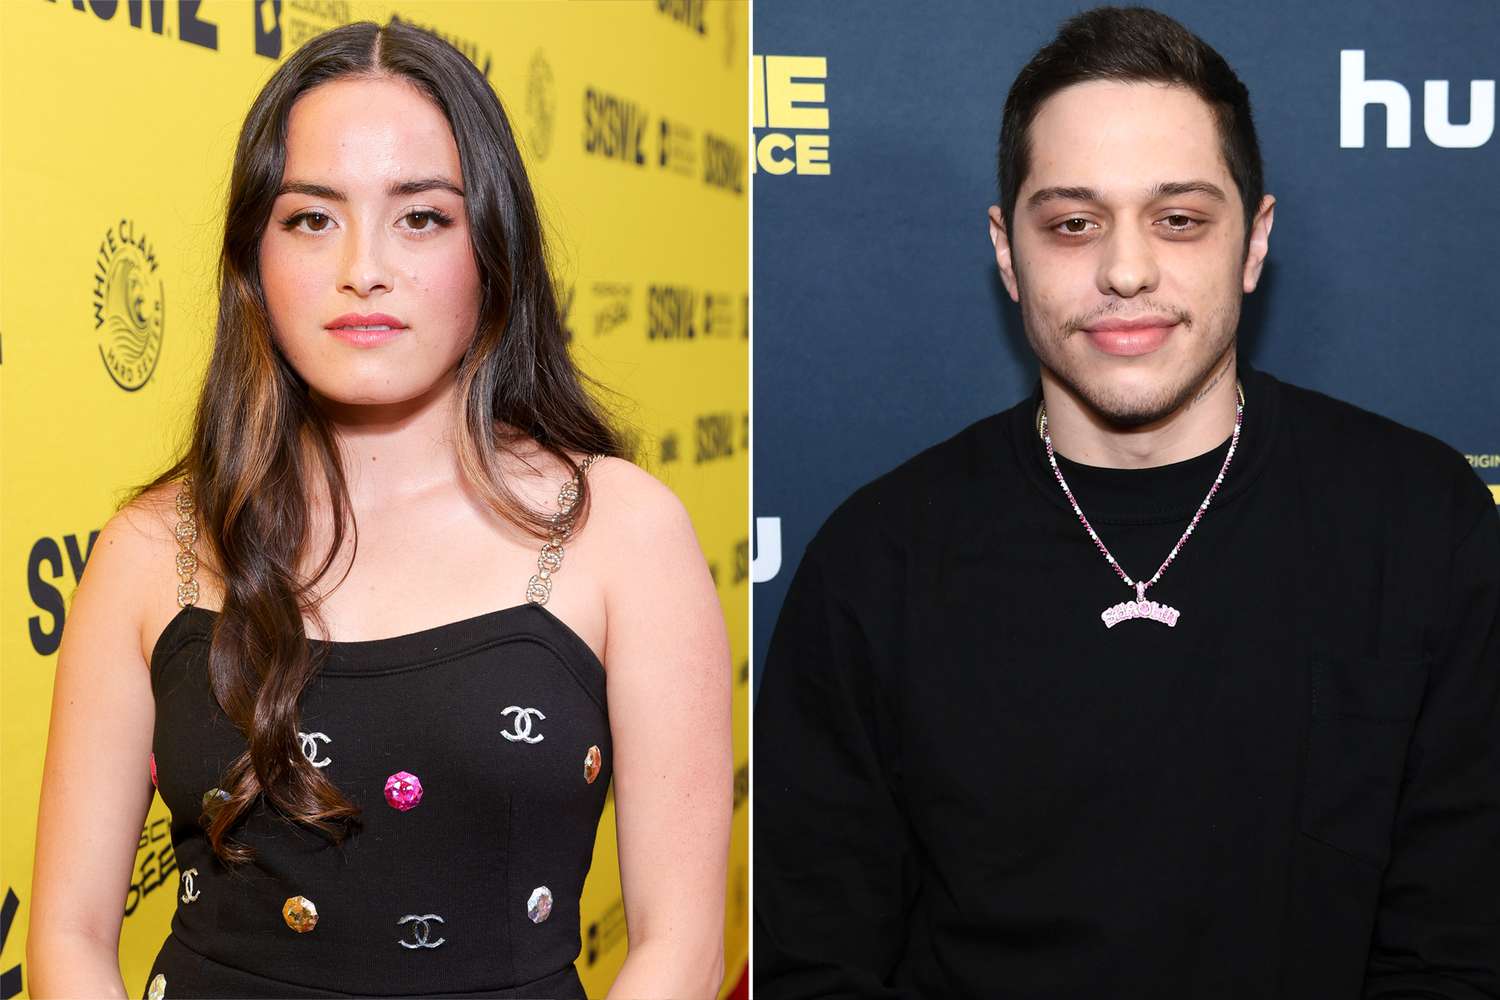 Pete Davidson & Chase Sui Wonders: A Love Story Unveiled - Exclusive Details Inside! 11